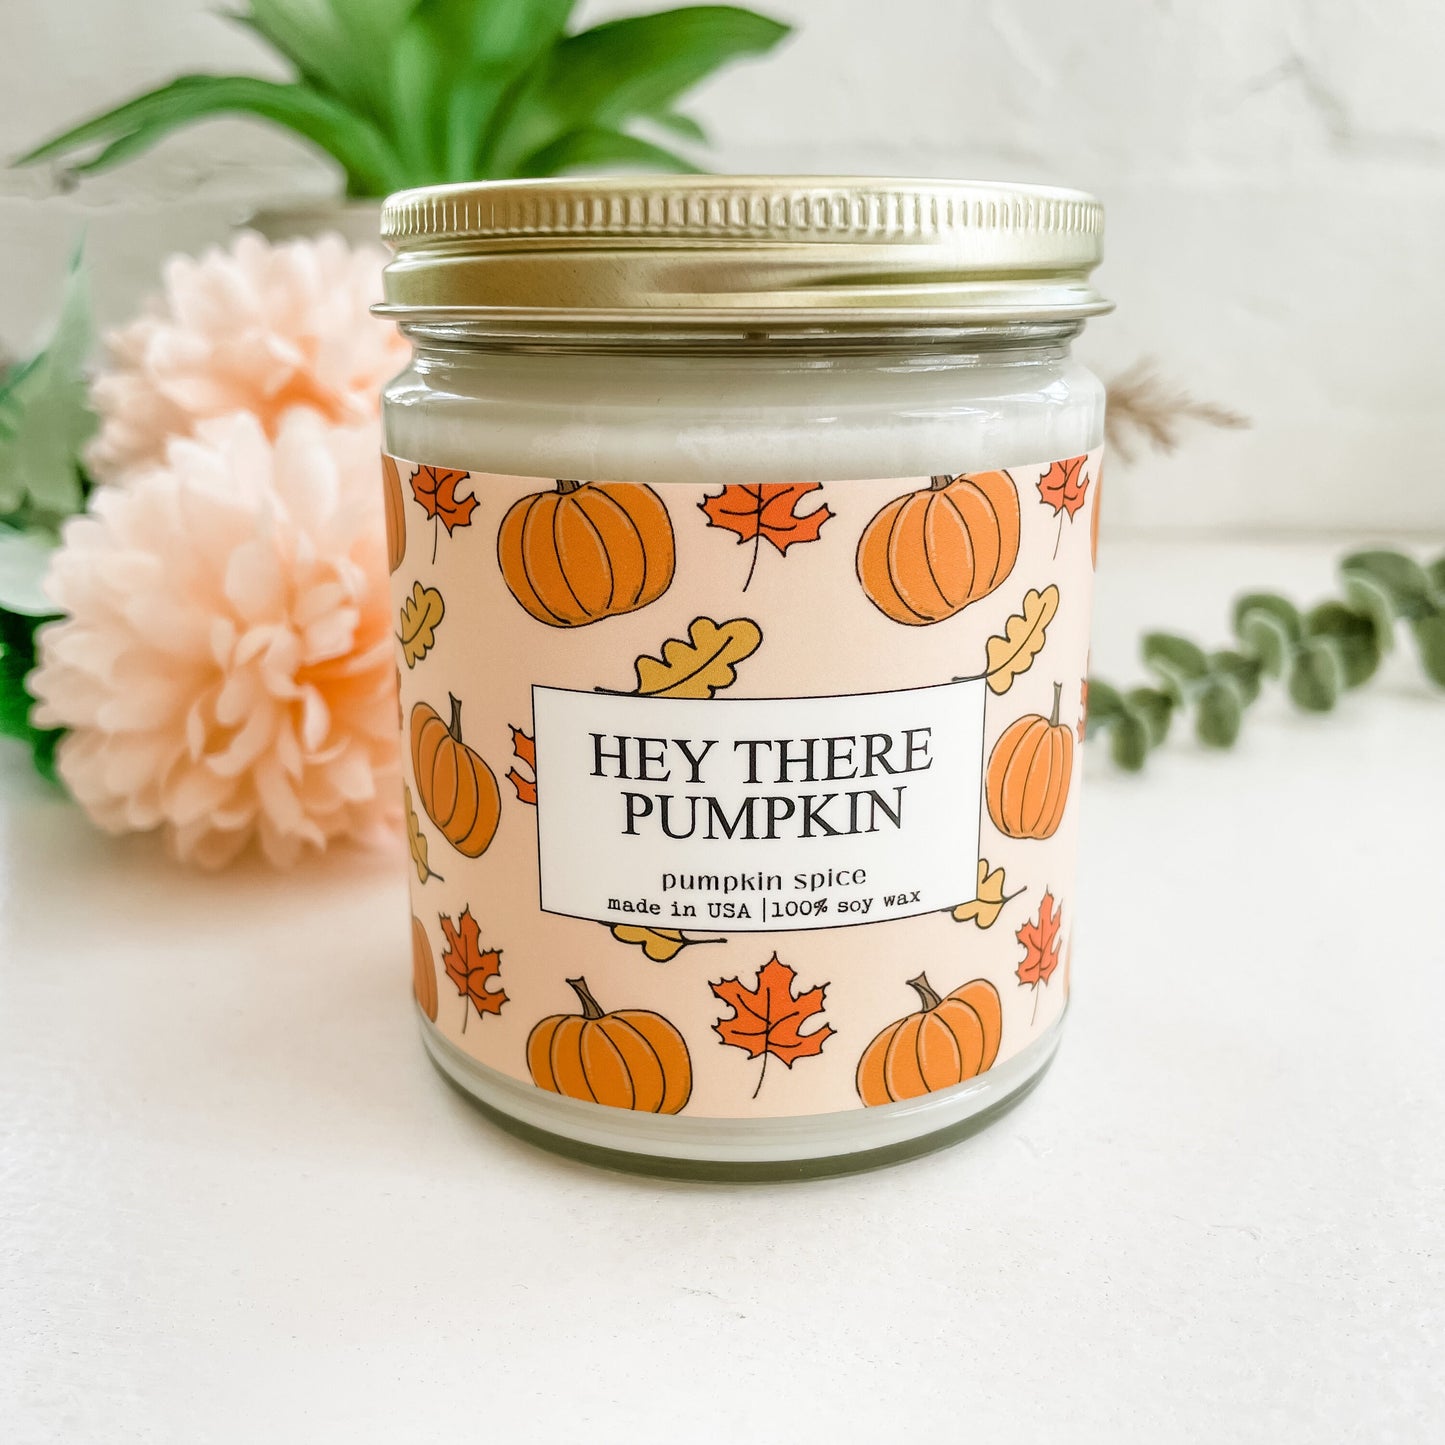 Hey There Pumpkin - 9oz Glass Jar Soy Candle - Pumpkin Spice Scent